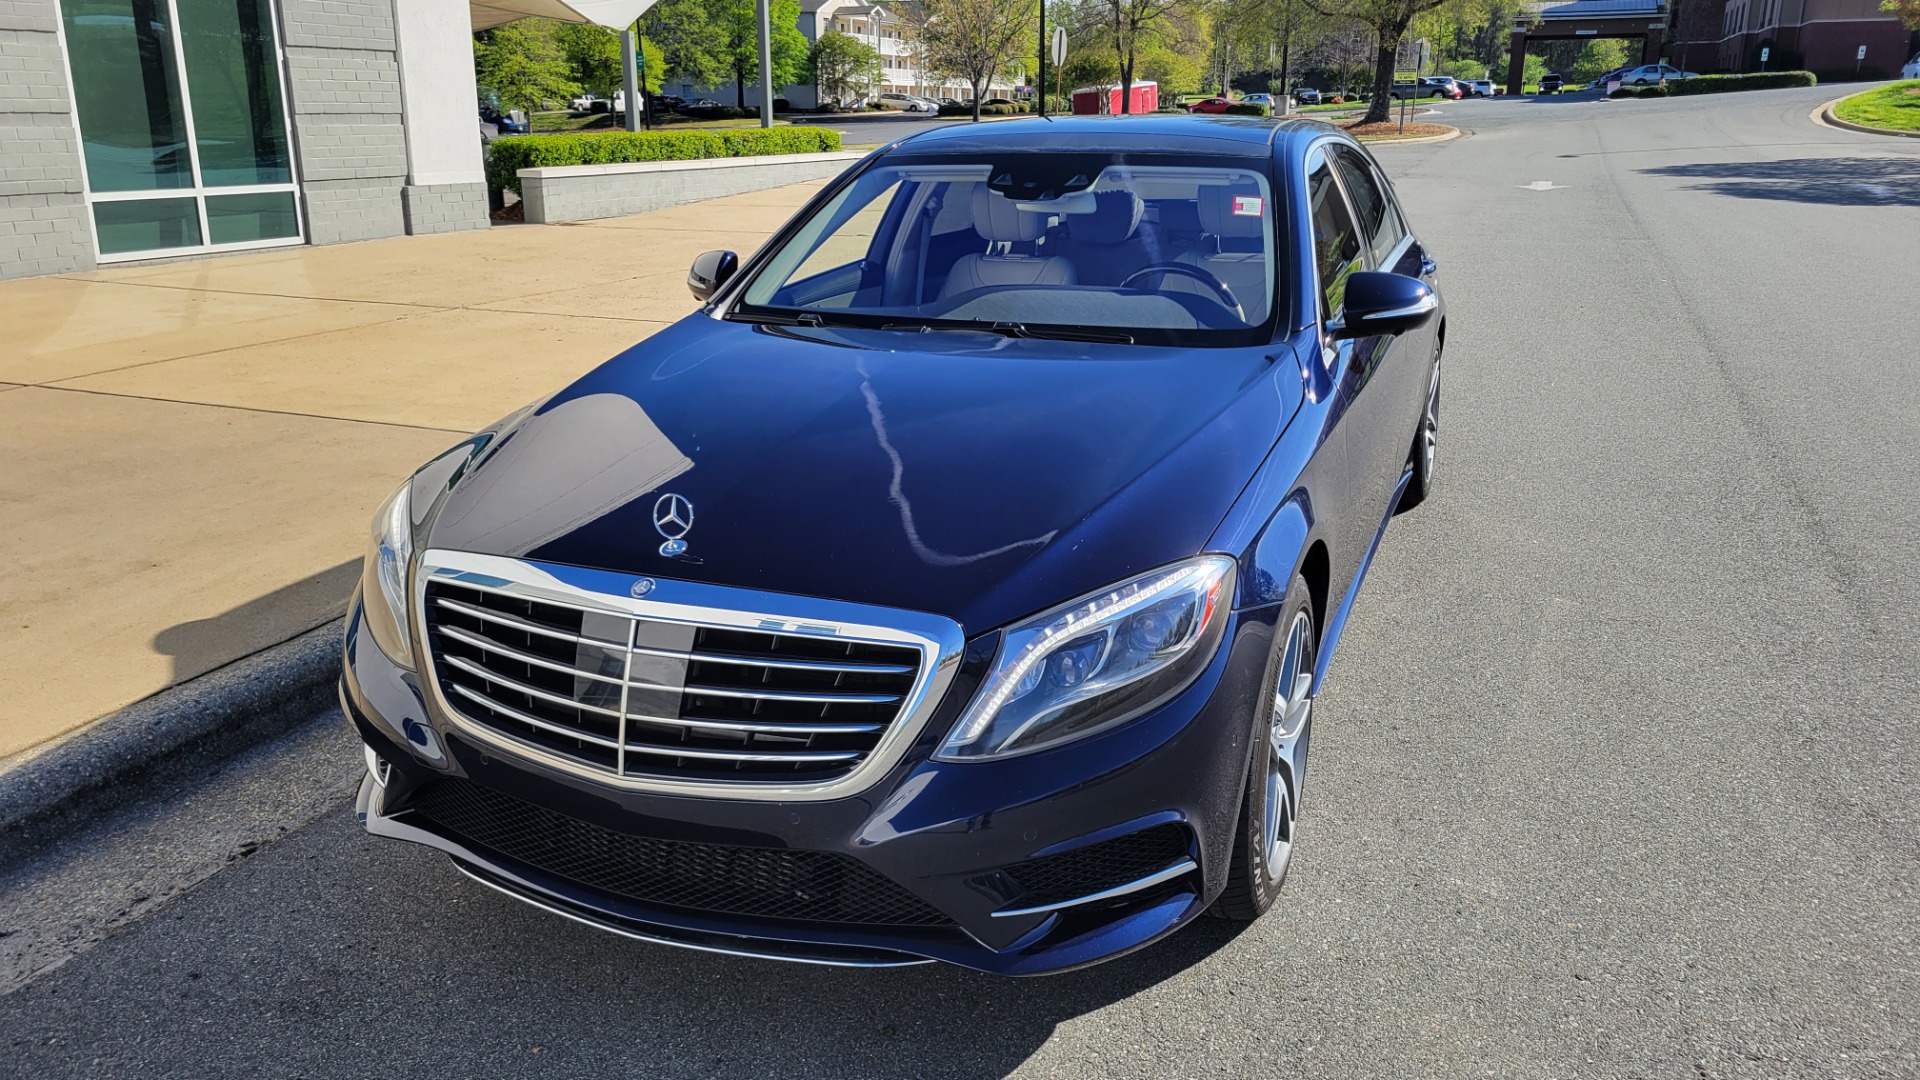 Used 2015 Mercedes-Benz S-CLASS S 550 4MATIC PREMIUM SPORT / WARMTH / DRVR ASST for sale $43,999 at Formula Imports in Charlotte NC 28227 3